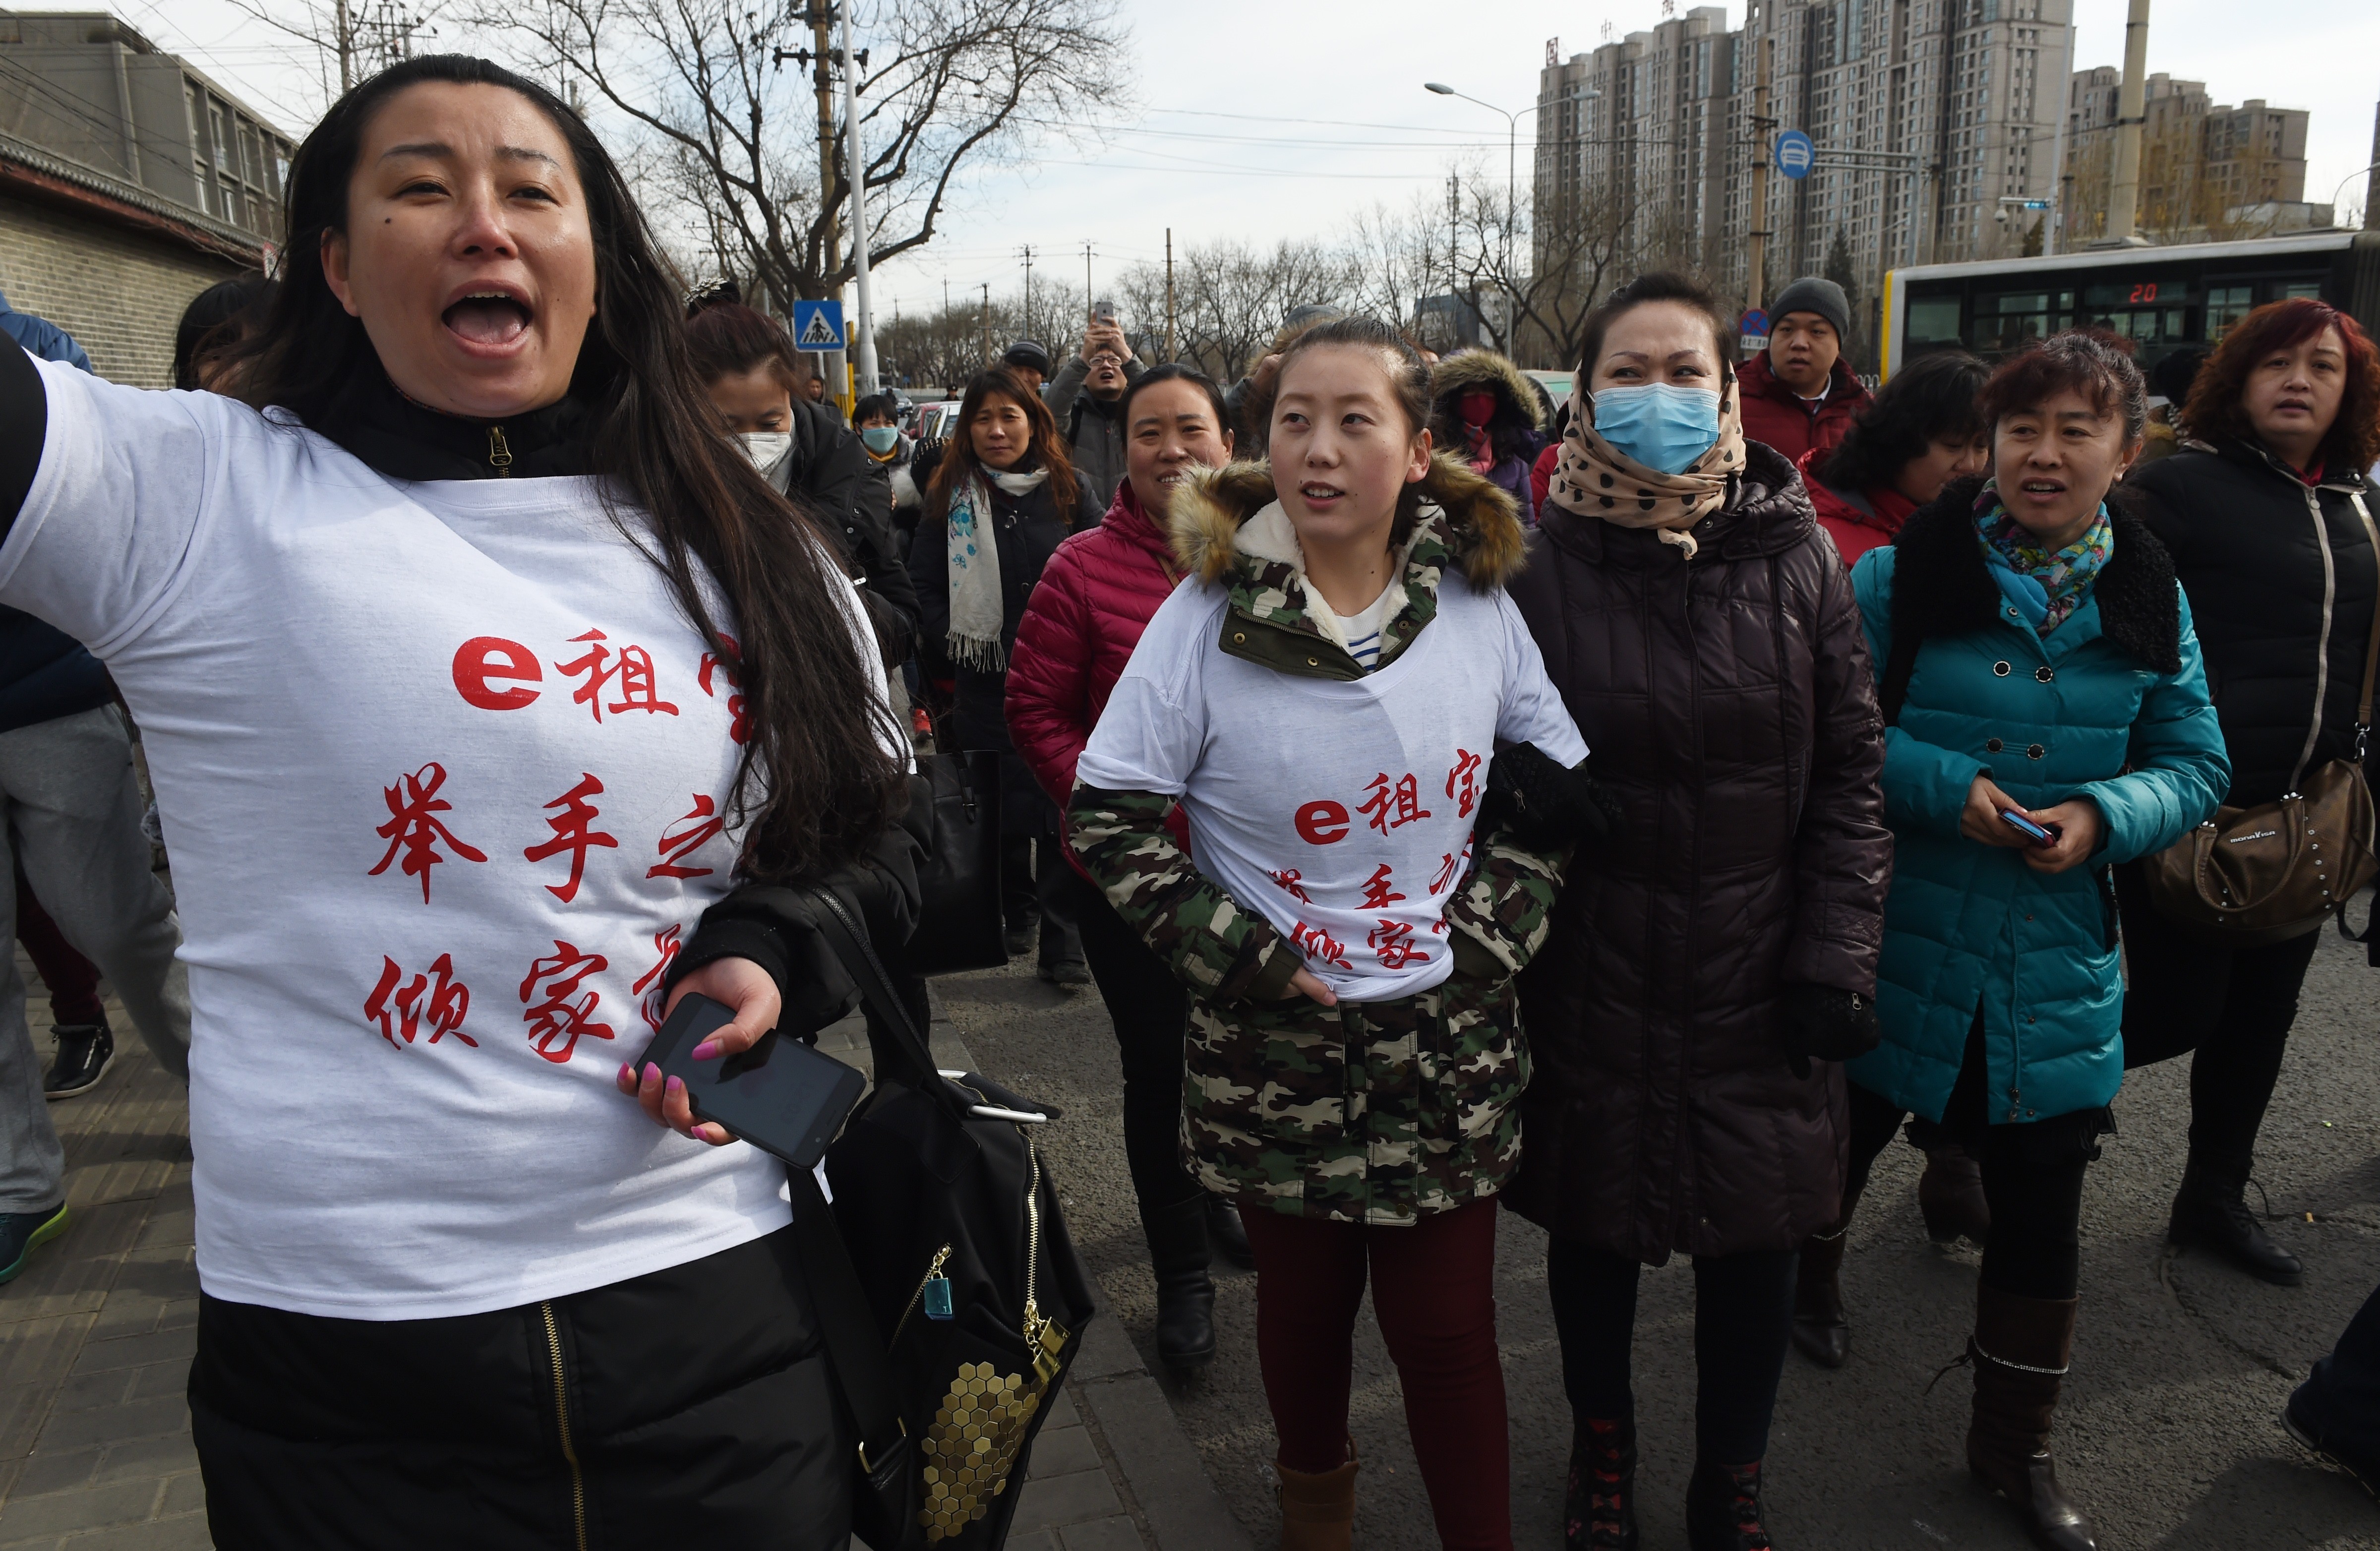 Ezubao investors chanting slogans during a protest in Beijing after police arrested 21 people on charges of defrauding 900,000 people of more than 50 billion yuan. Photo: Agence France-Presse